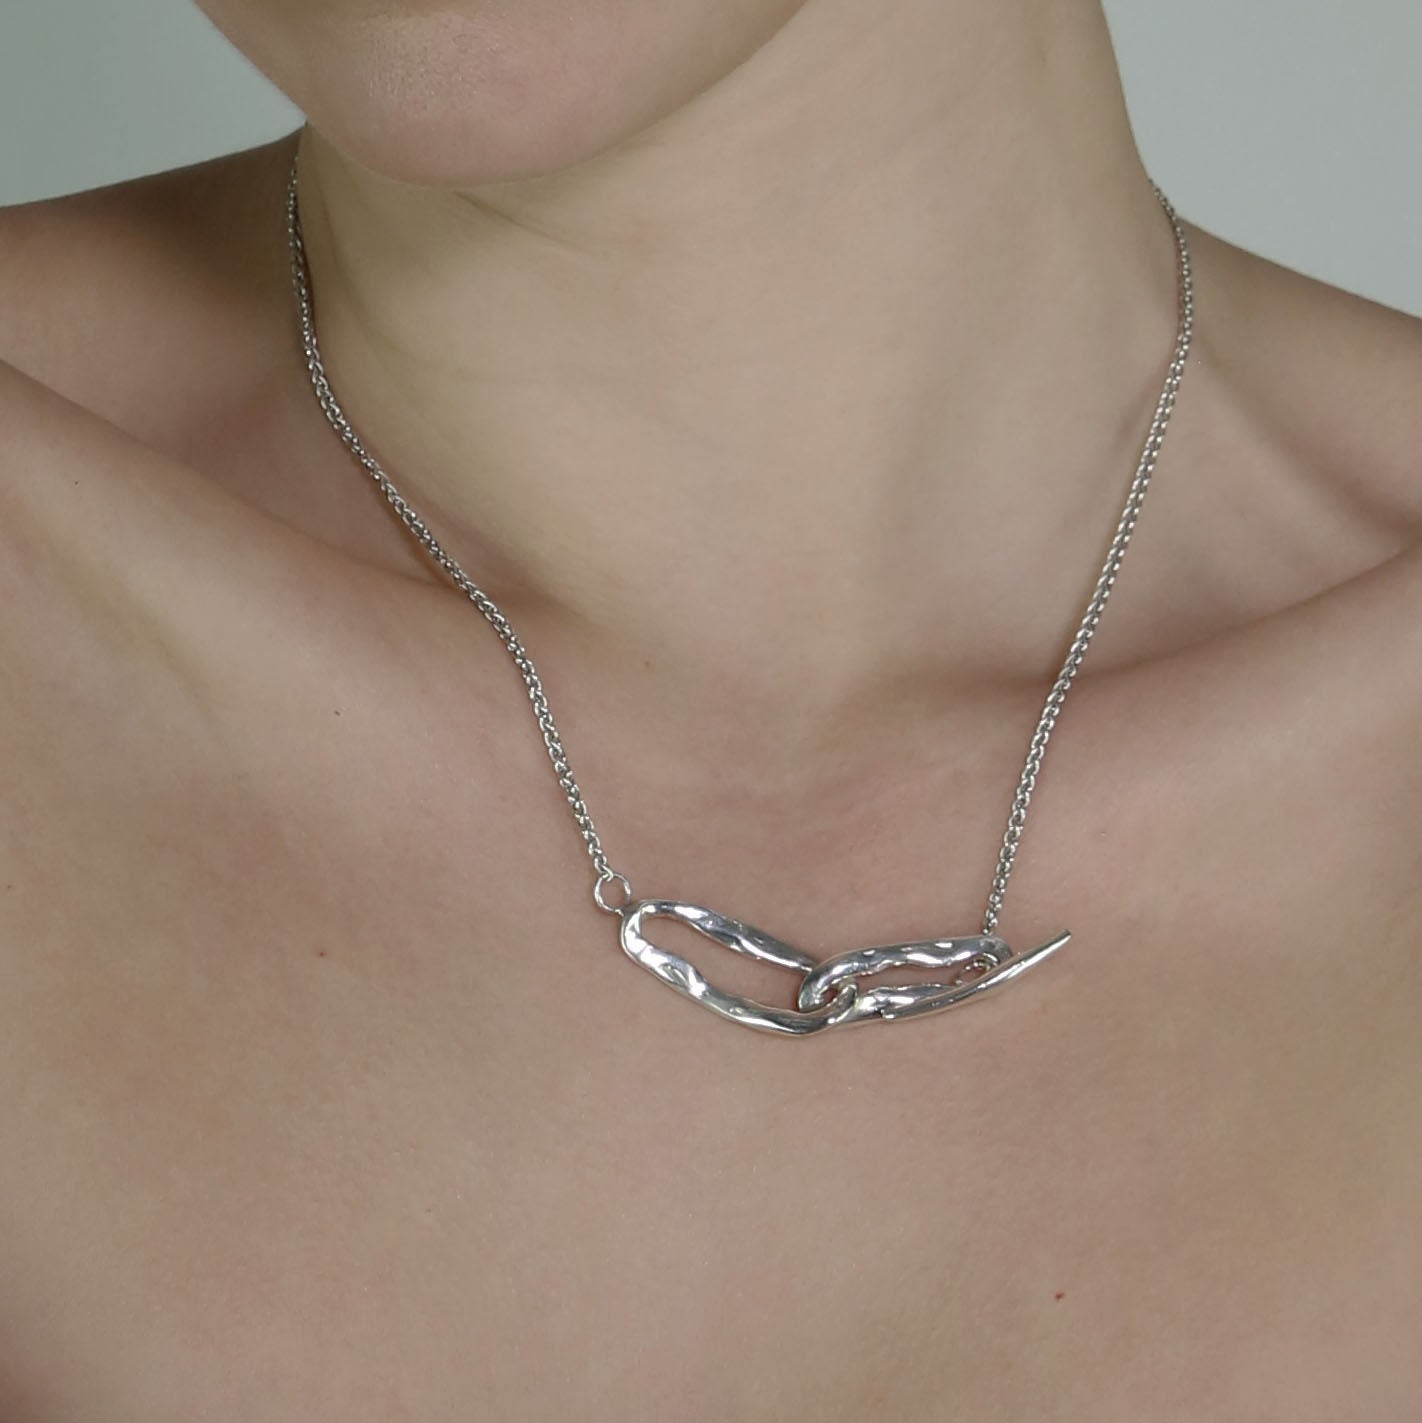 The Calma necklace is a handmade piece crafted from sterling silver 925. It features two irregular silver shapes connected by a thin rod that intricately weaves through them, creating a unique and secure closure. The texture resembles raw elegance and has a glossy finish.